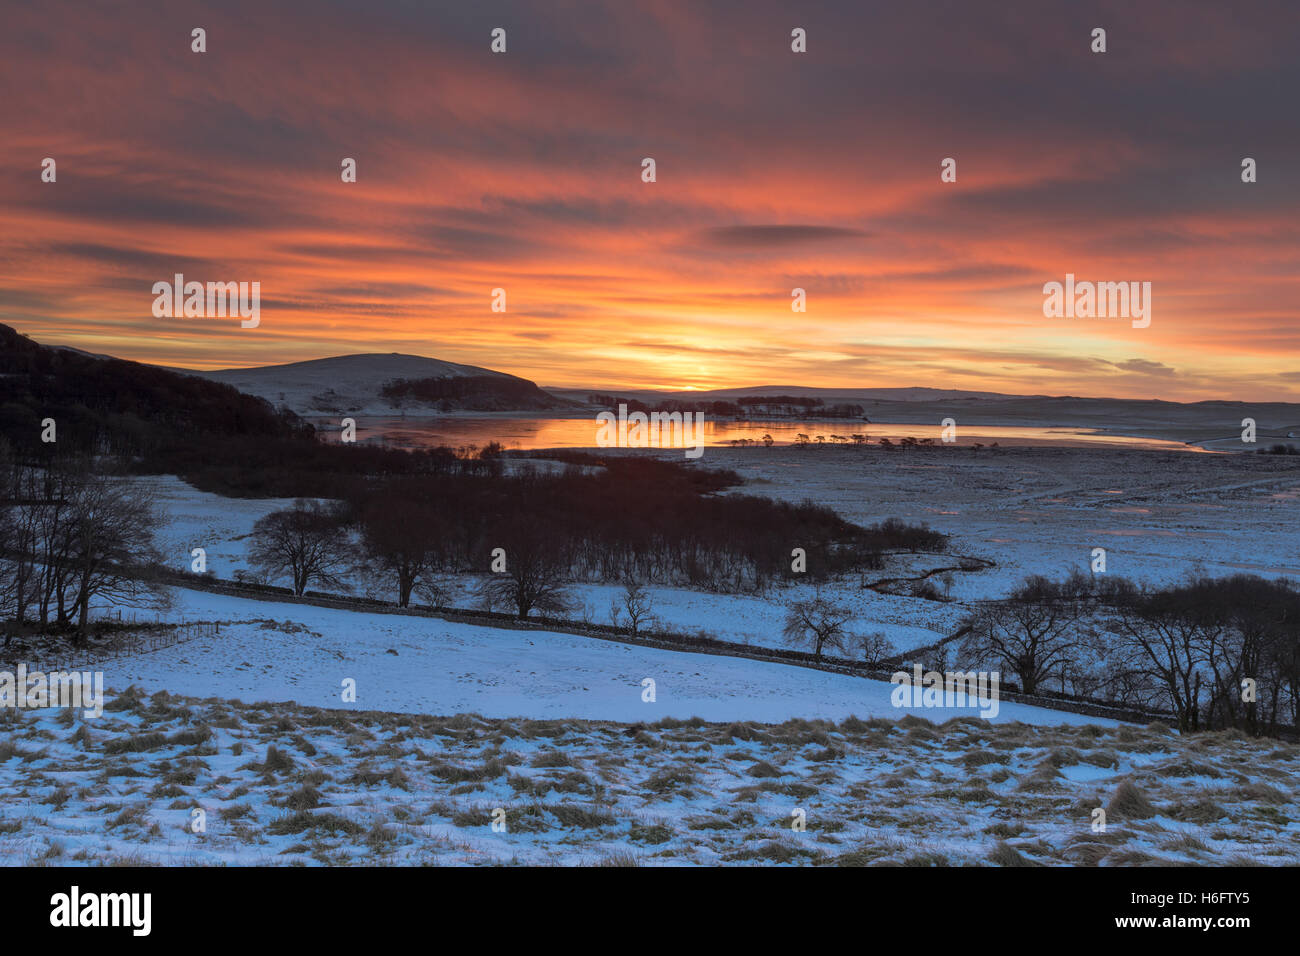 Dramatic winter sunrise over a frozen Malham Tarn in the Yorkshire Dales National Park, UK Stock Photo